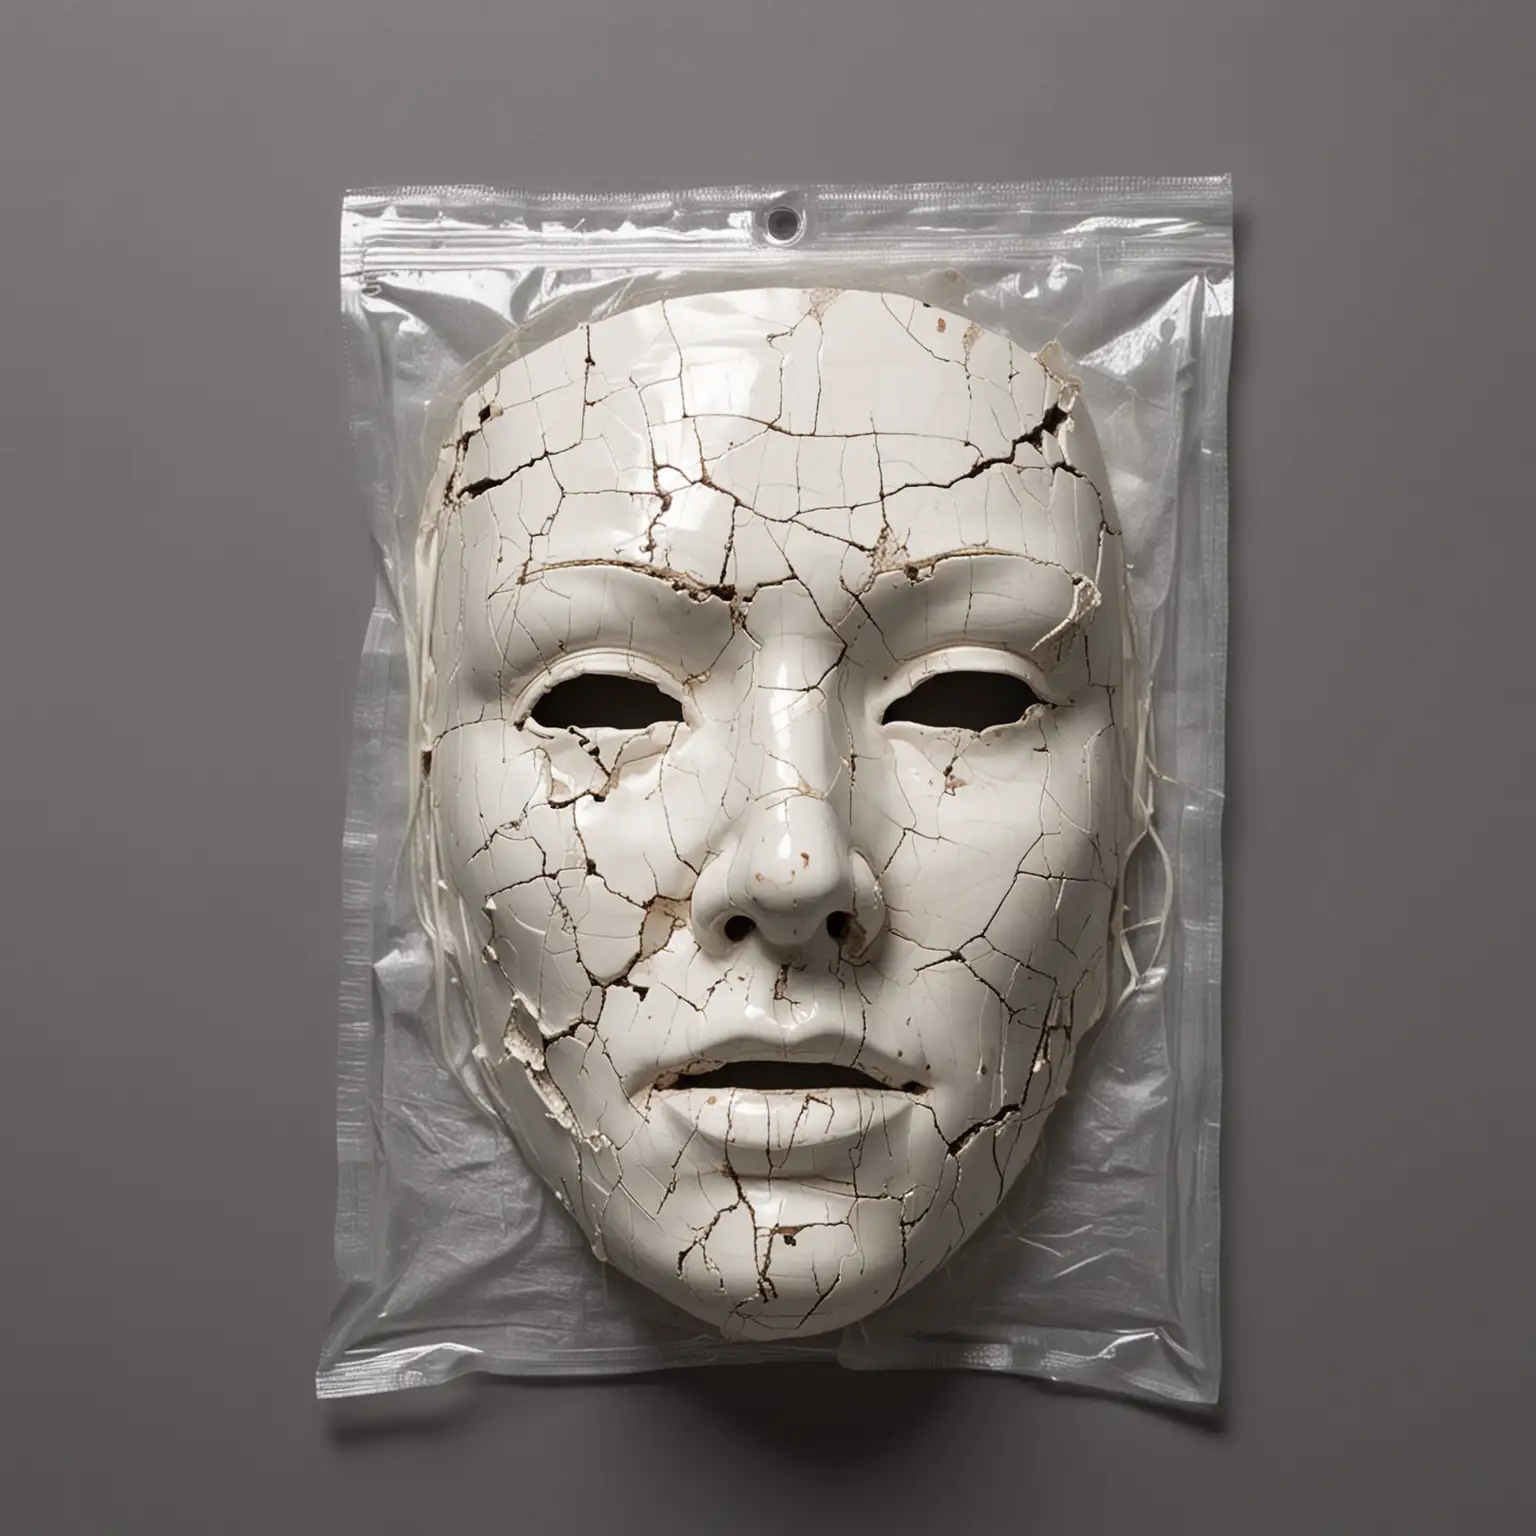 A cracked white porcelain mask in a police evidence bag